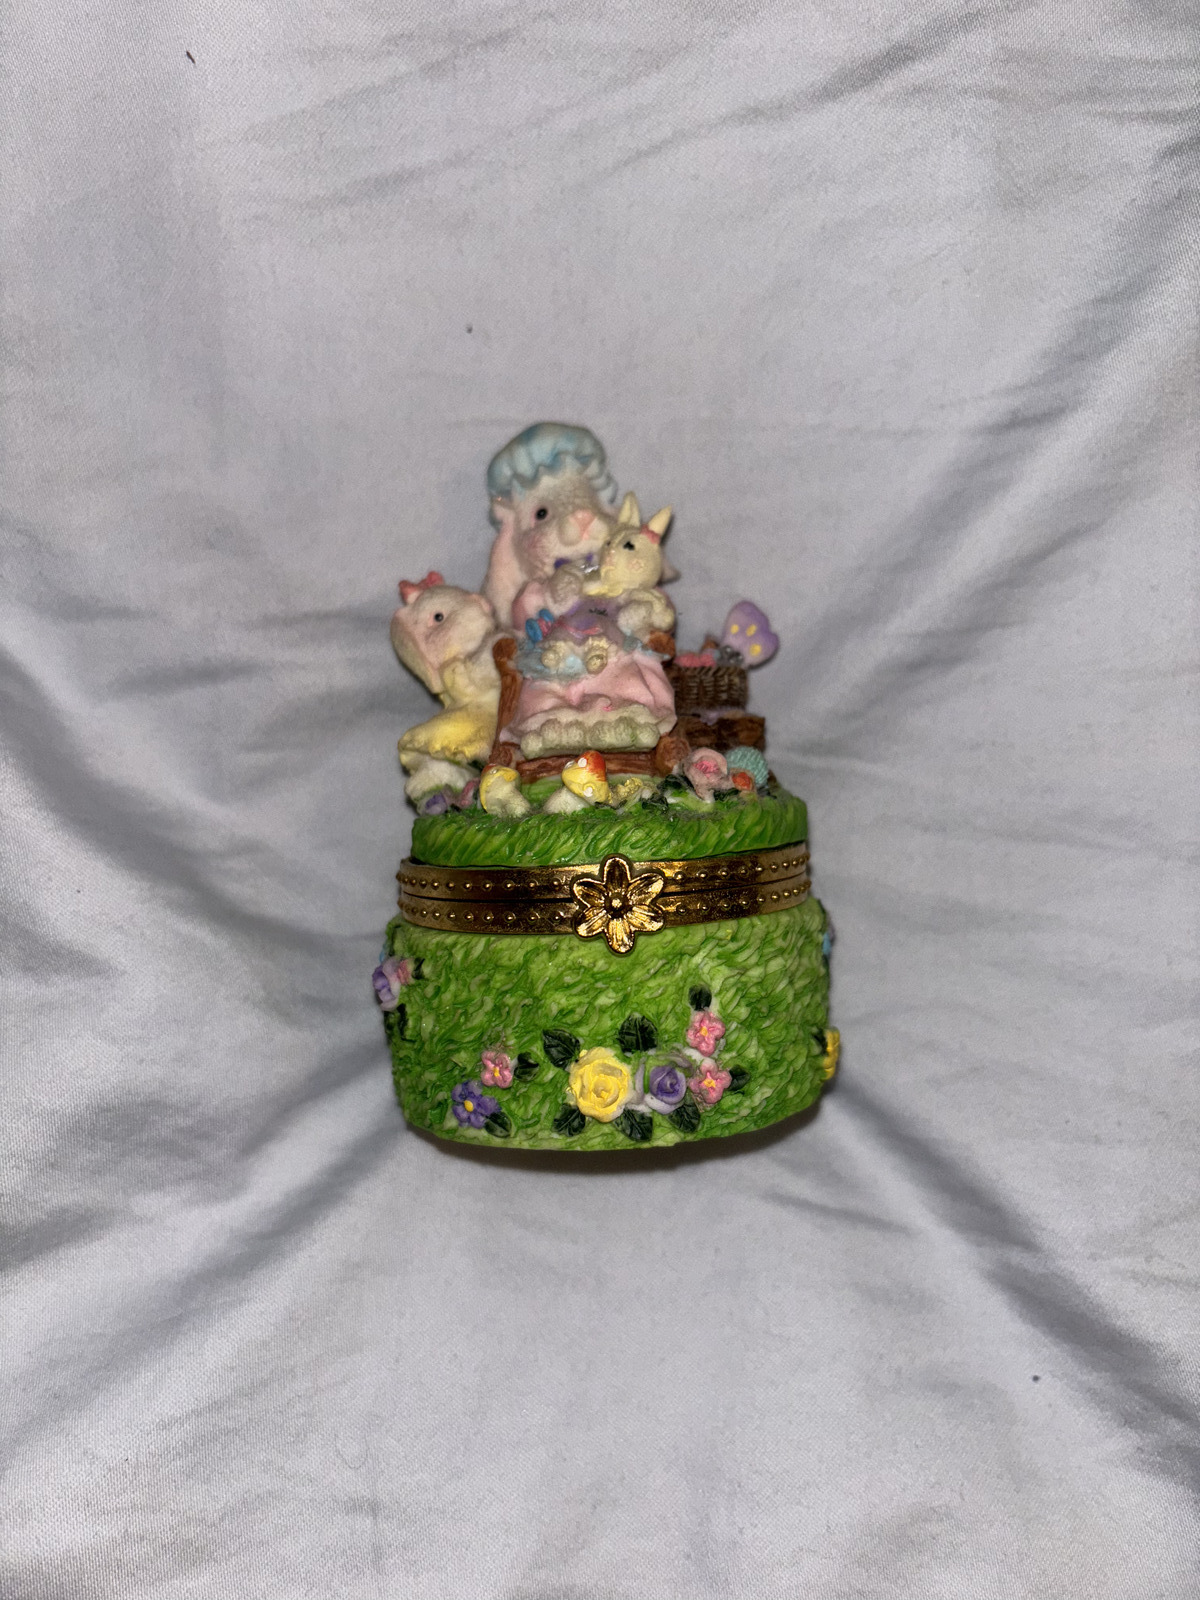 Vintage porcelain trinket box with momma bunny sewing an animal for her daughter